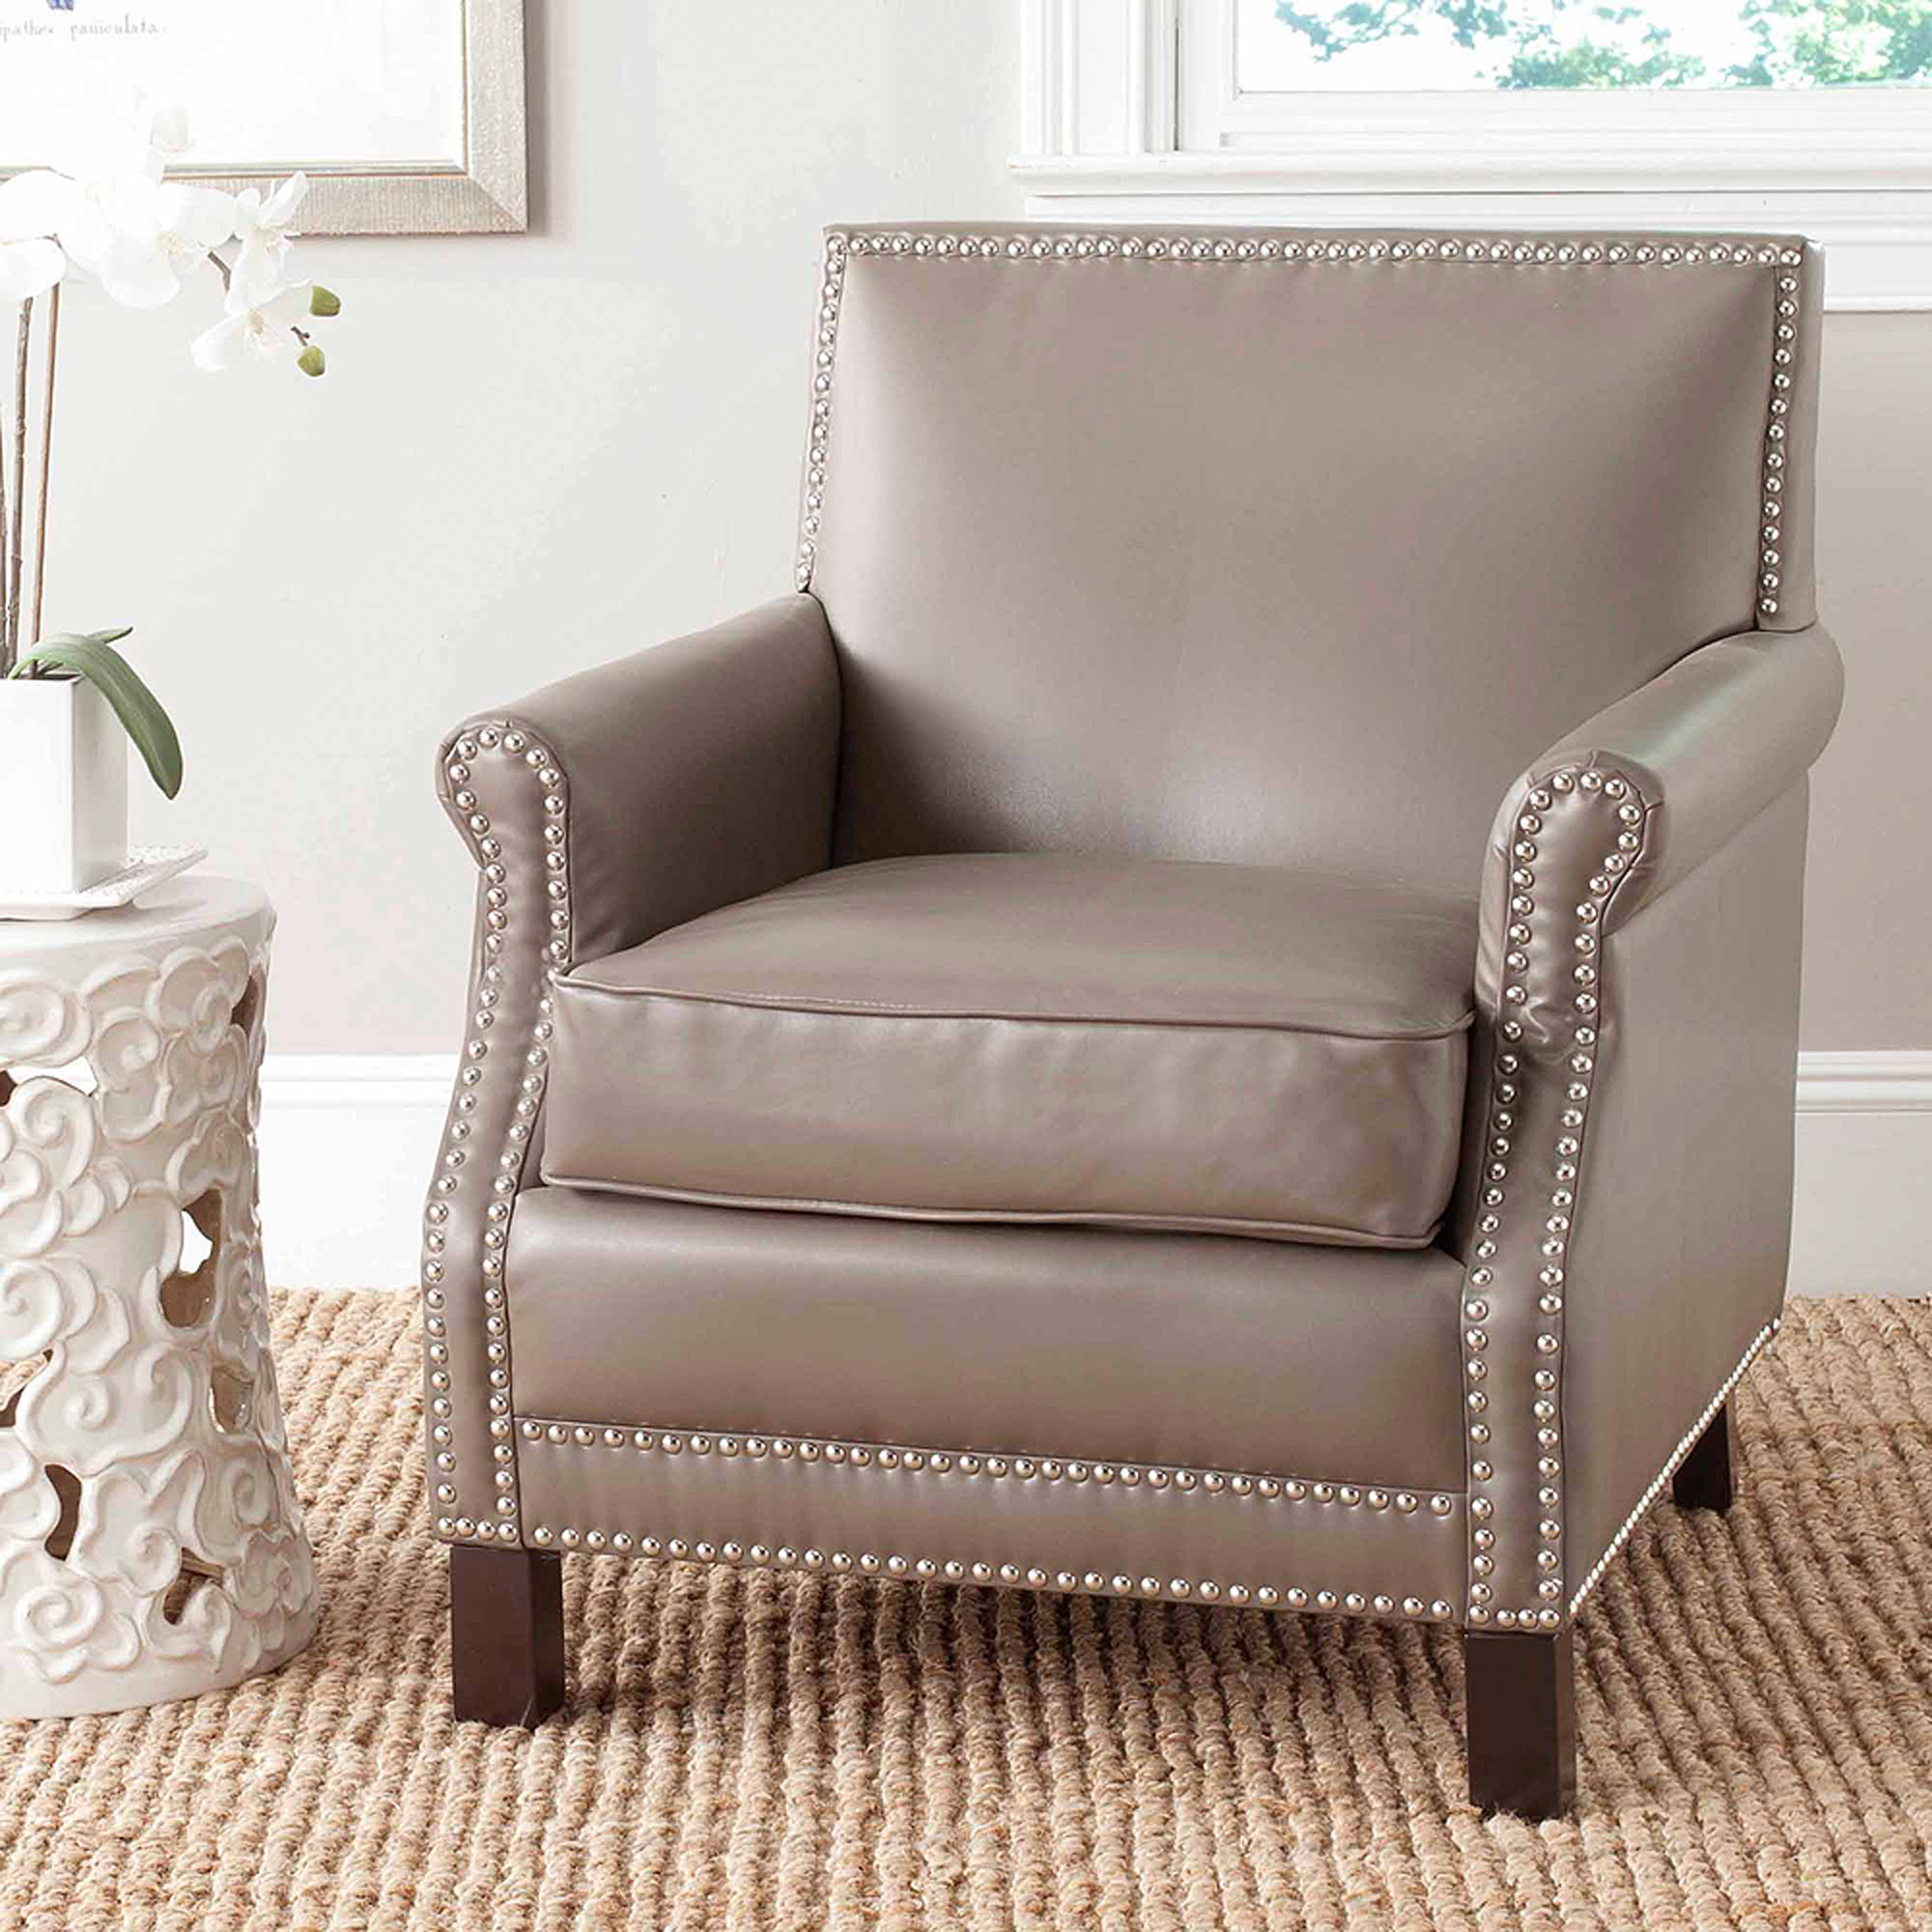 SAFAVIEH Easton Rustic Glam Upholstered Club Chair w/ Nailheads, Clay - image 1 of 4